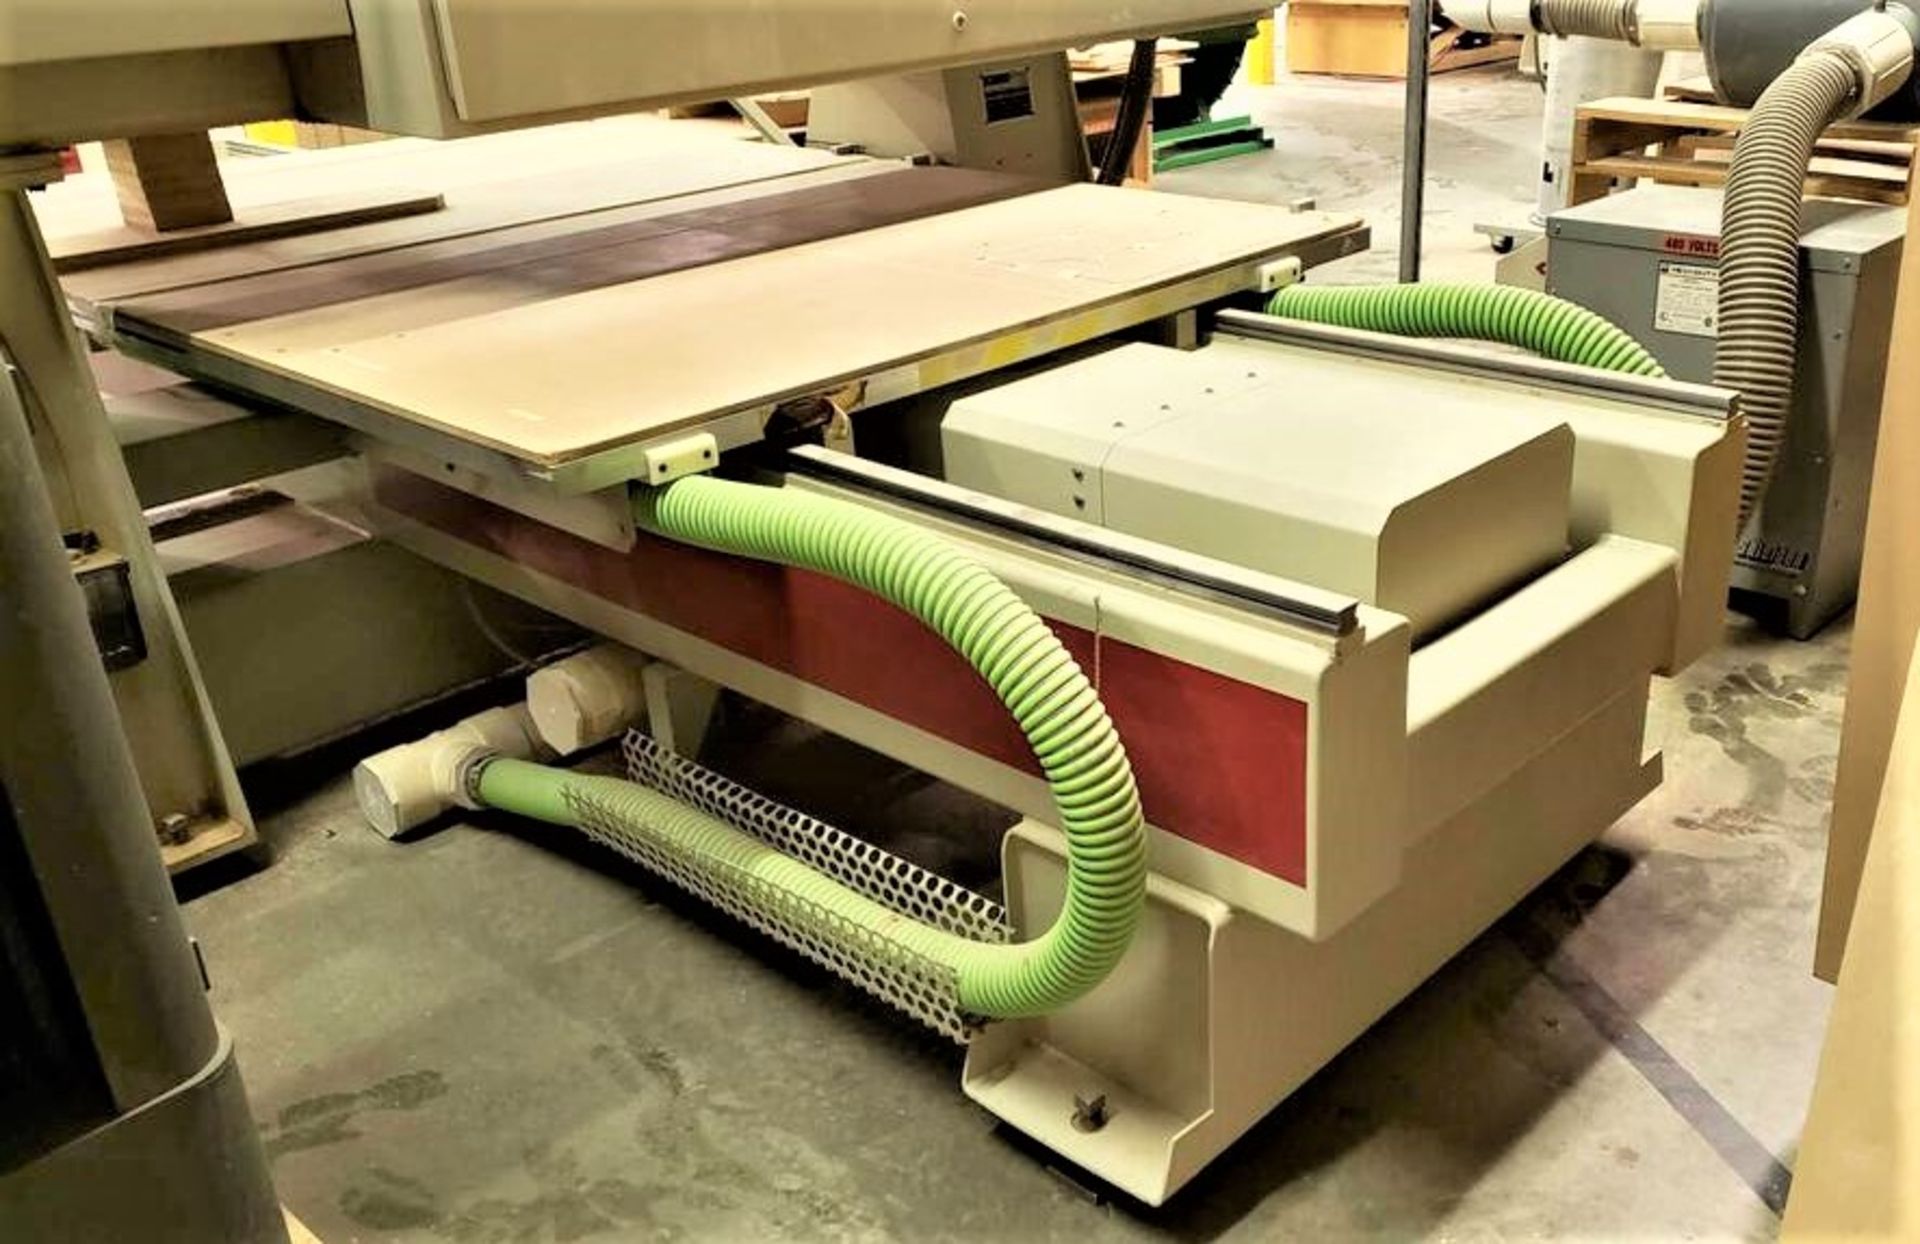 5'X8' Komo Model VR508 Mach II 3-Axis CNC Router, S/N 31780-03-01-00, New 2000 - Image 7 of 10